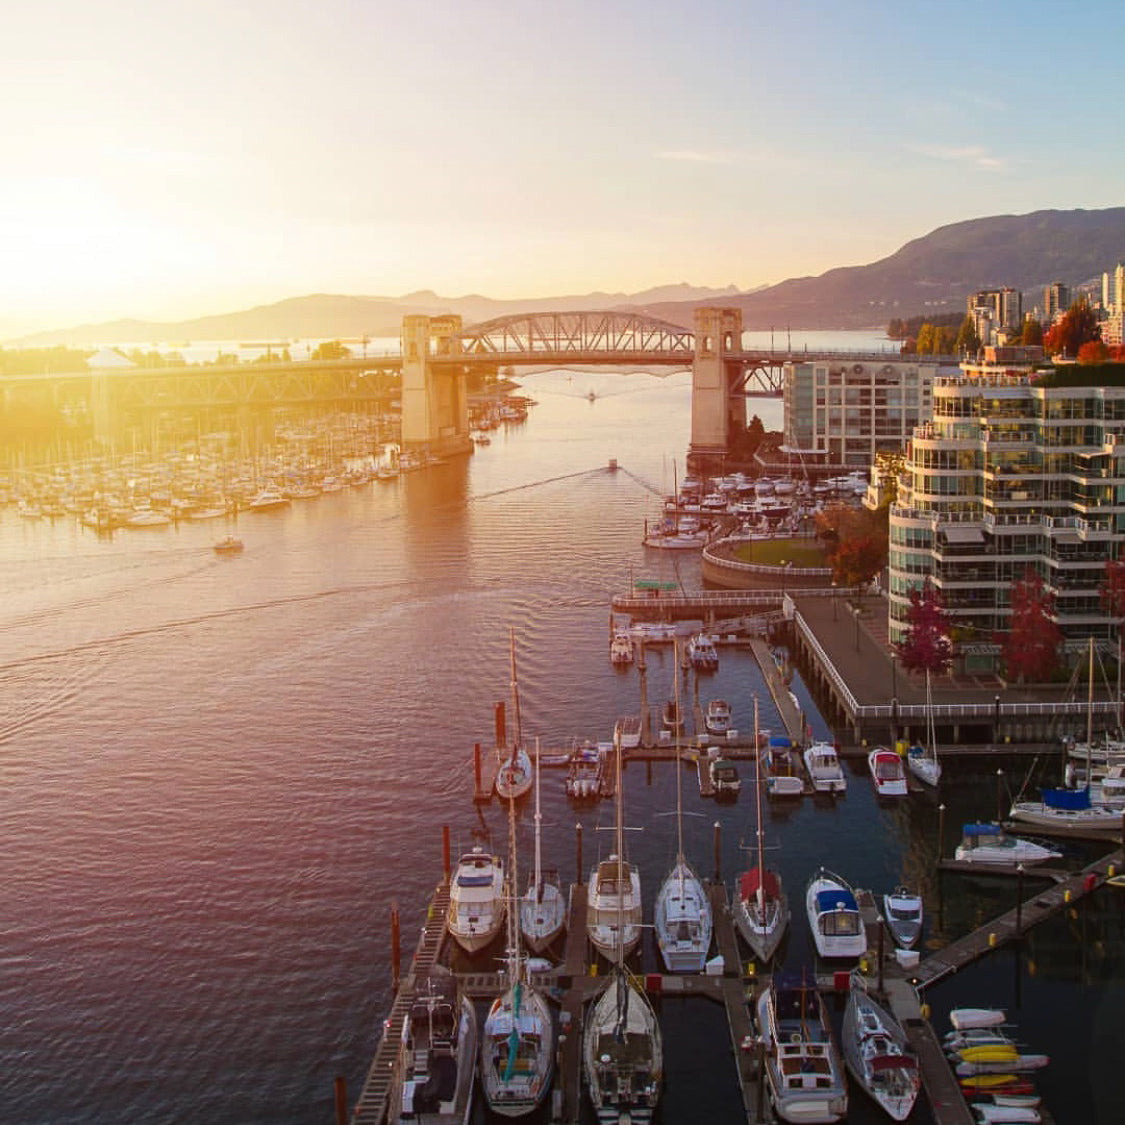 Sunset over Burrard Street Bridge in Vancouver. Connecting Granville Island and Kits Point with Yaletown